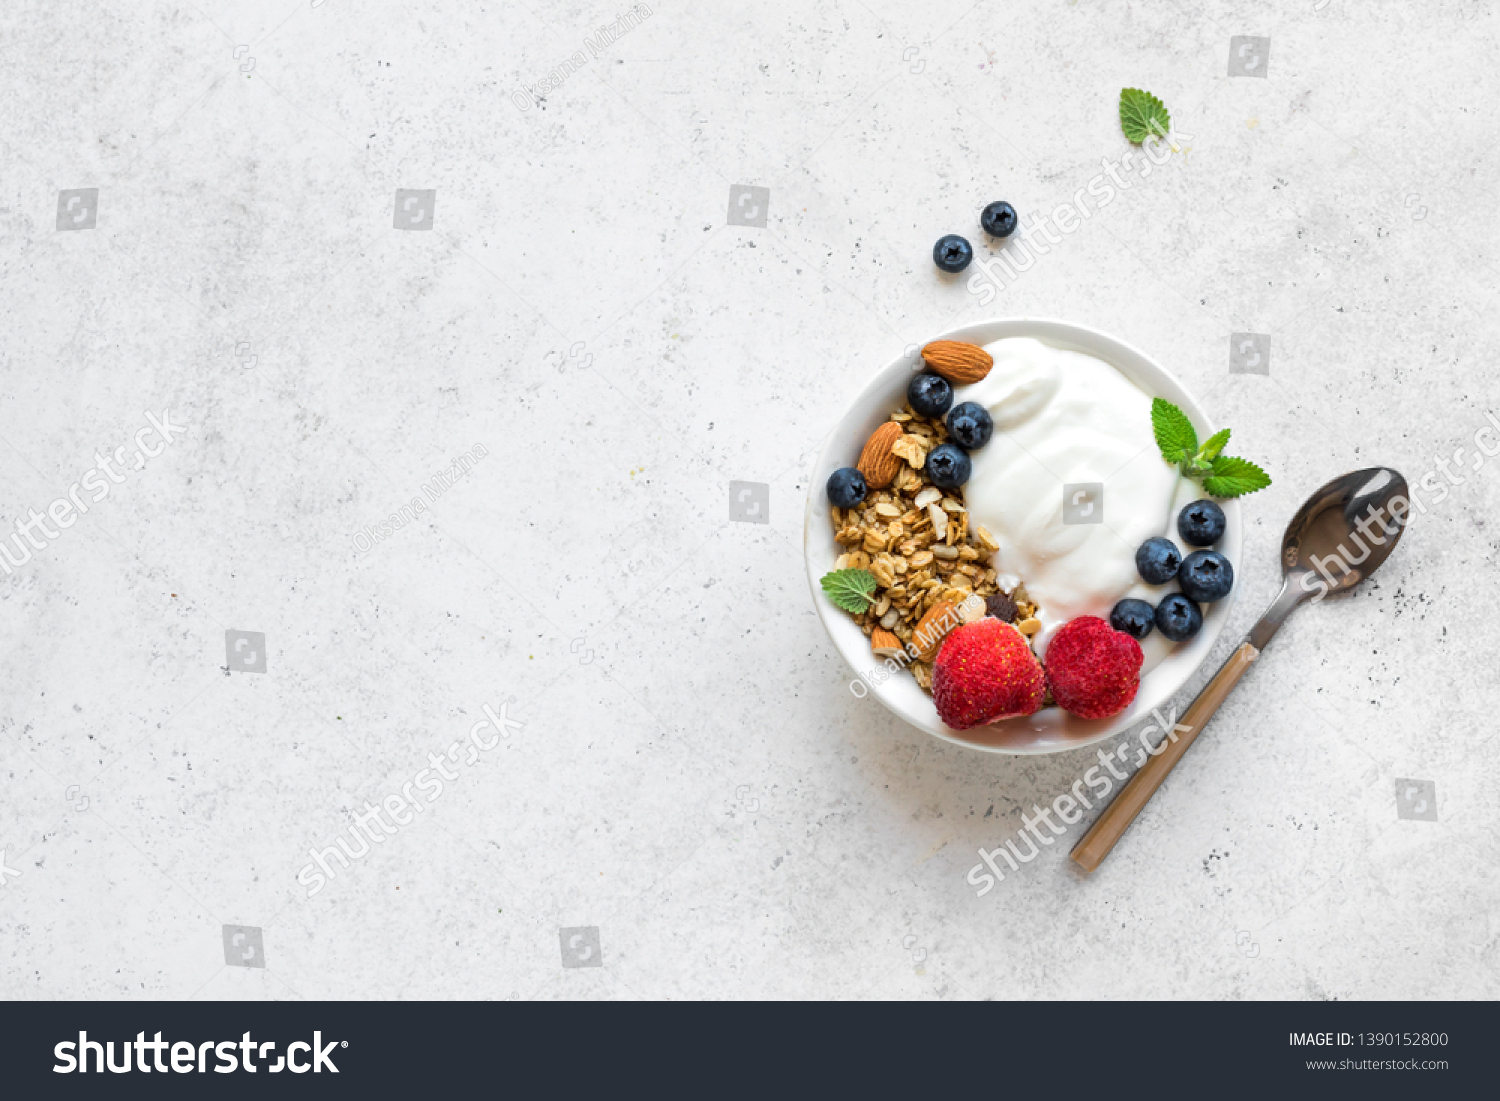 Granola with yogurt and berries for healthy breakfast. Bowl of greek yogurt with granola, almonds, blueberries and strawberries, top view, copy space. #1390152800